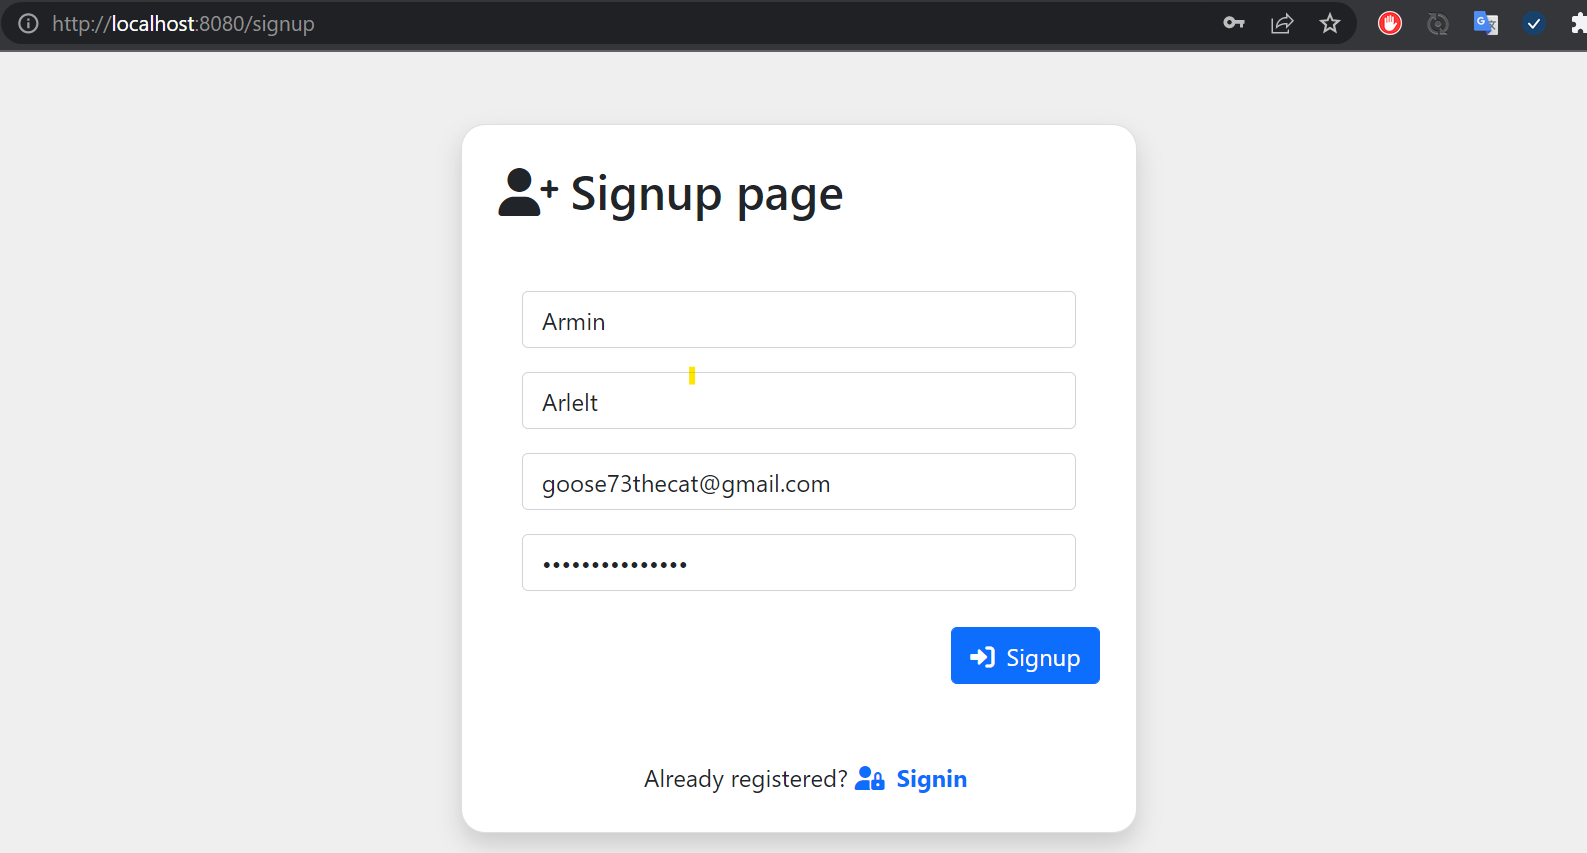 Sign Up Page